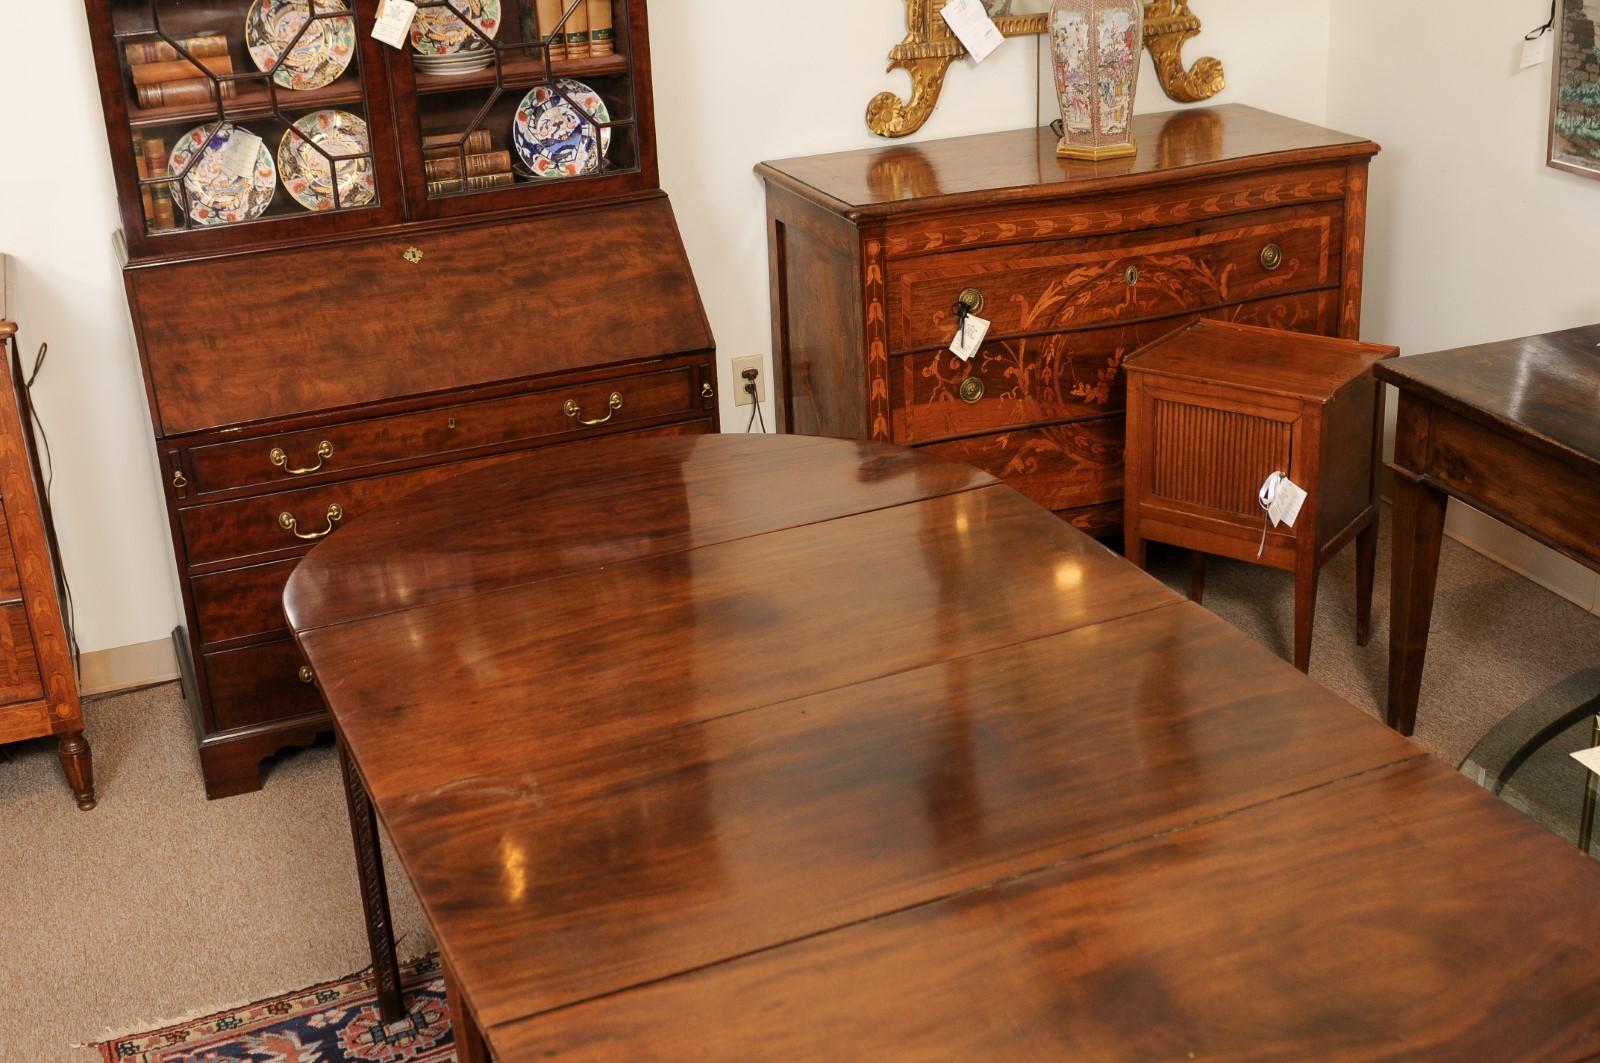 19th Century English Mahogany Dining Table with Carved Legs & 2 Leaves For Sale 7